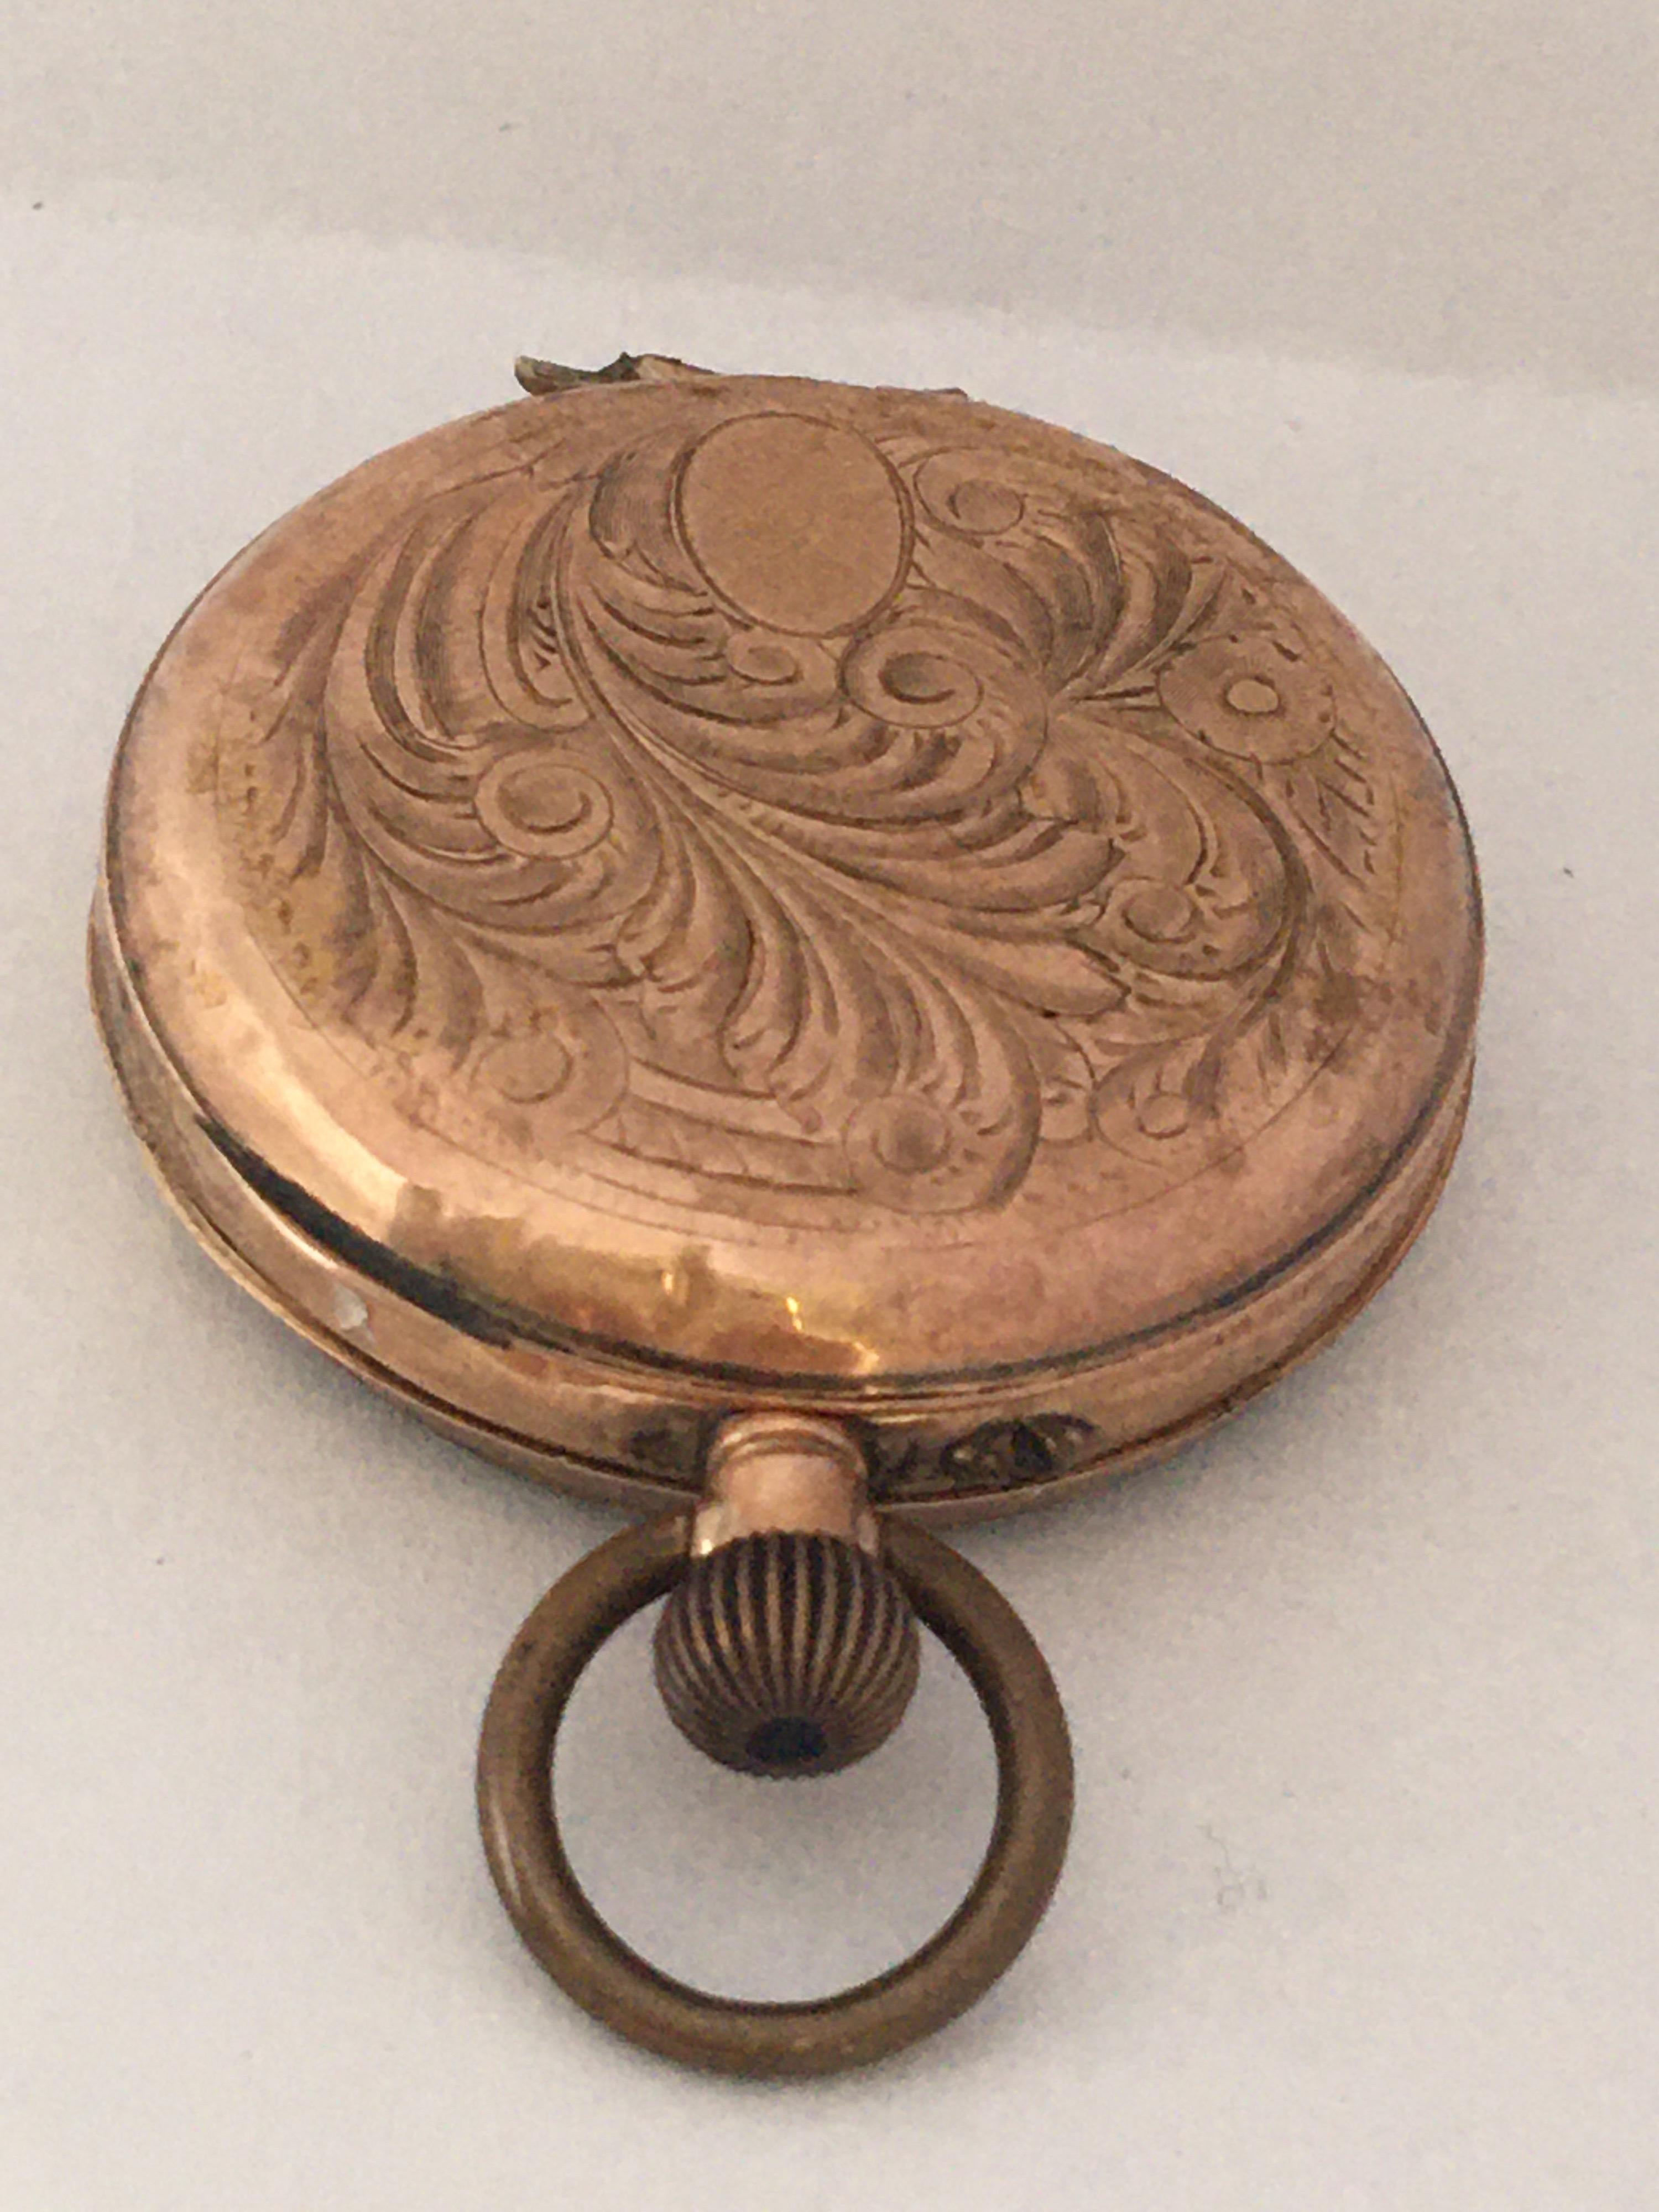 Small 9 Karat Gold Hans-Winding Antique Fob / Pocket Watch For Sale 2